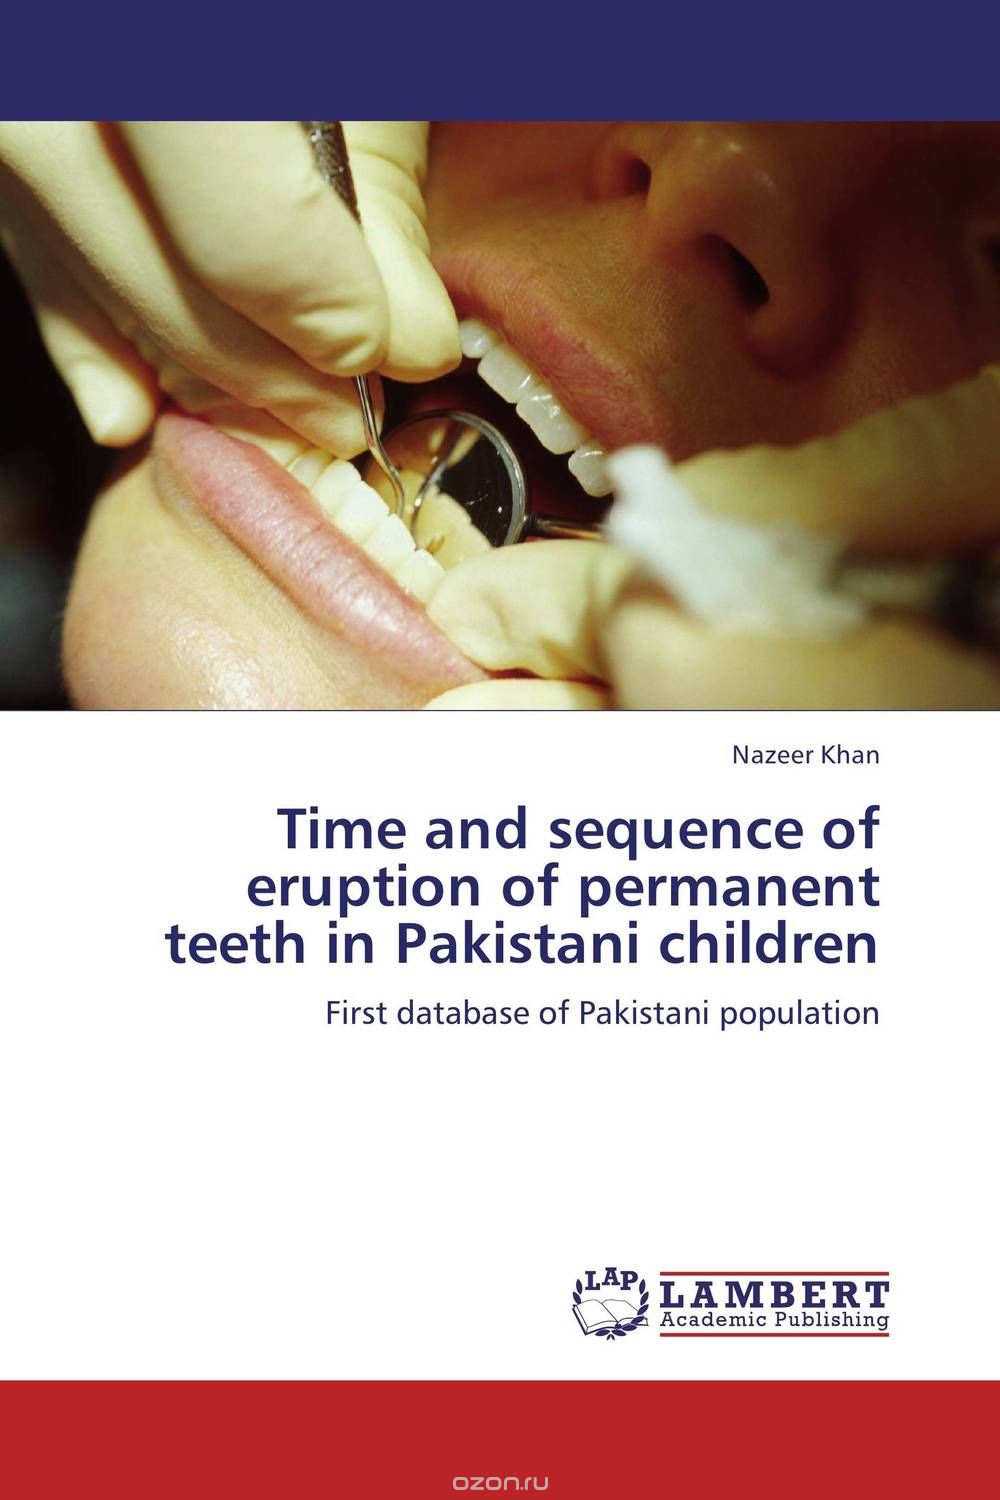 Скачать книгу "Time and sequence of eruption of permanent teeth in Pakistani children"